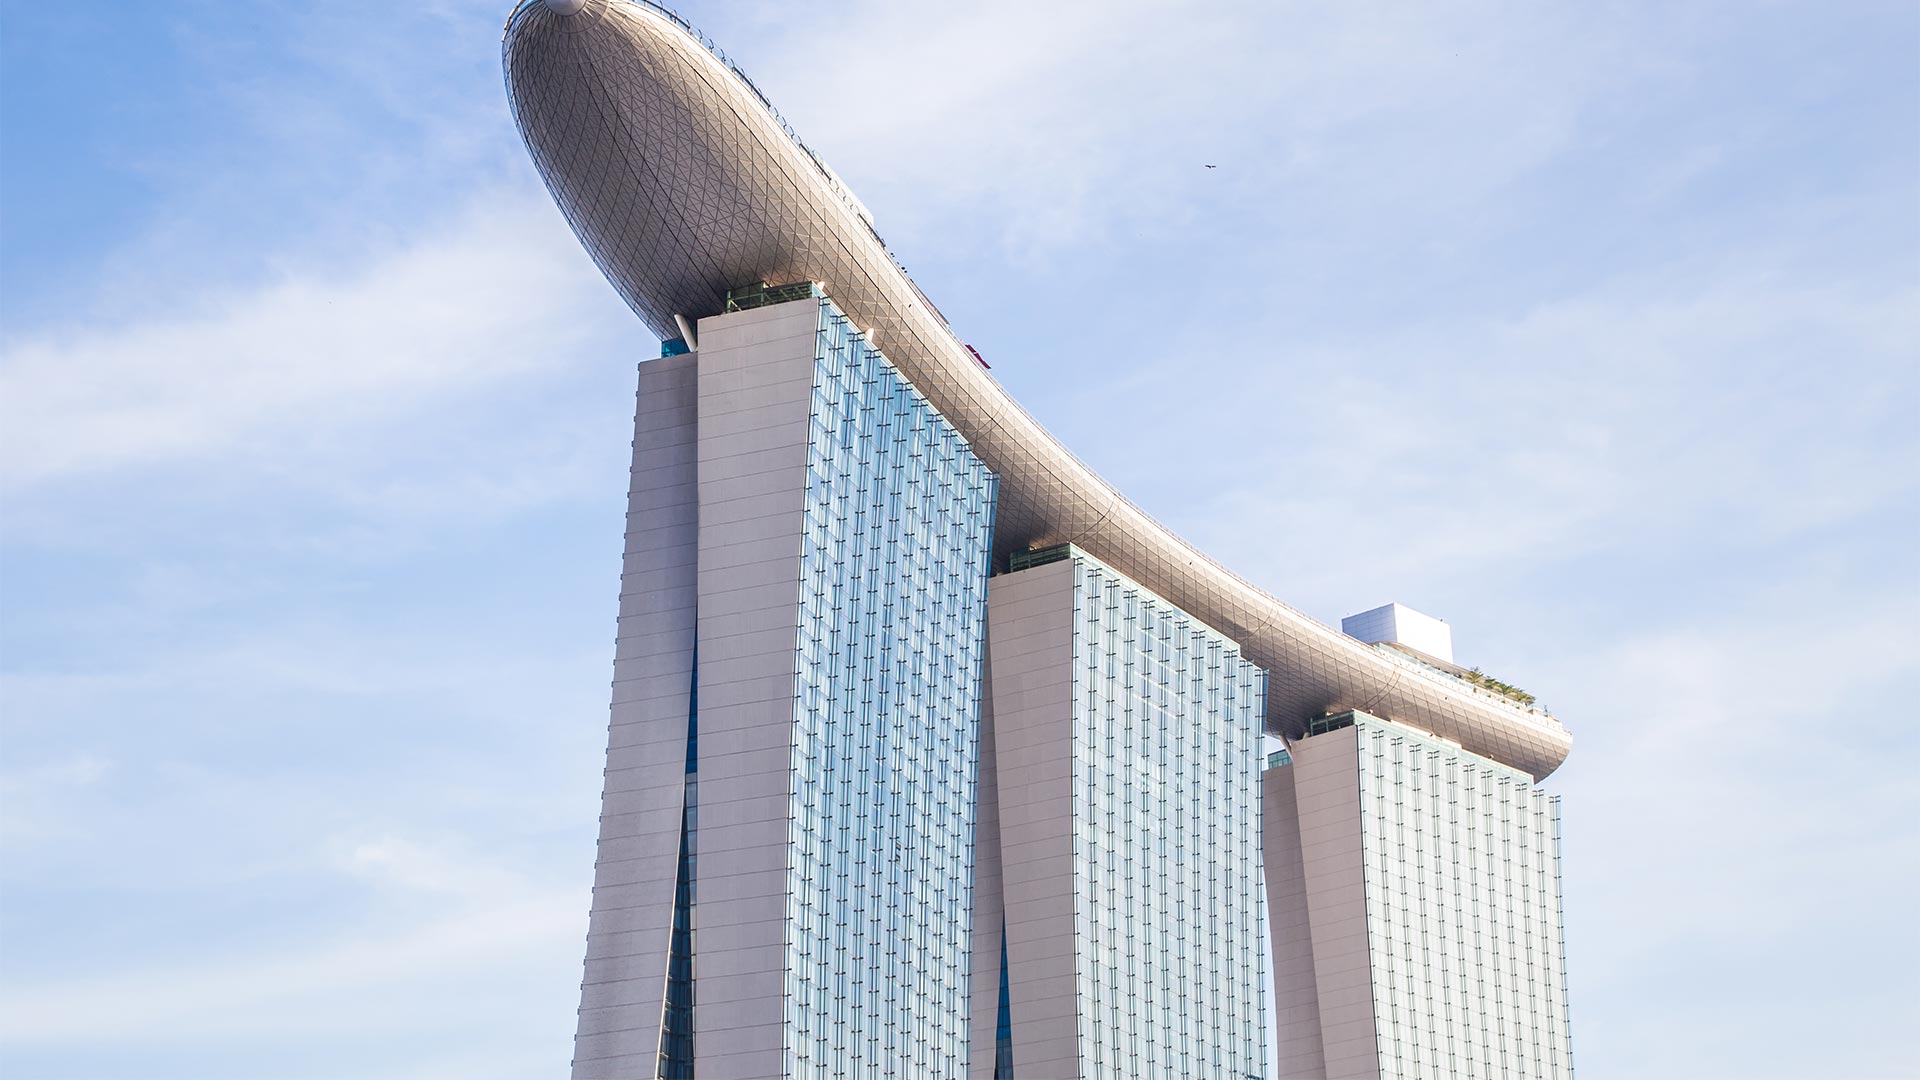 Close up shot of the architecture of Marina Bay Sands, Singapore